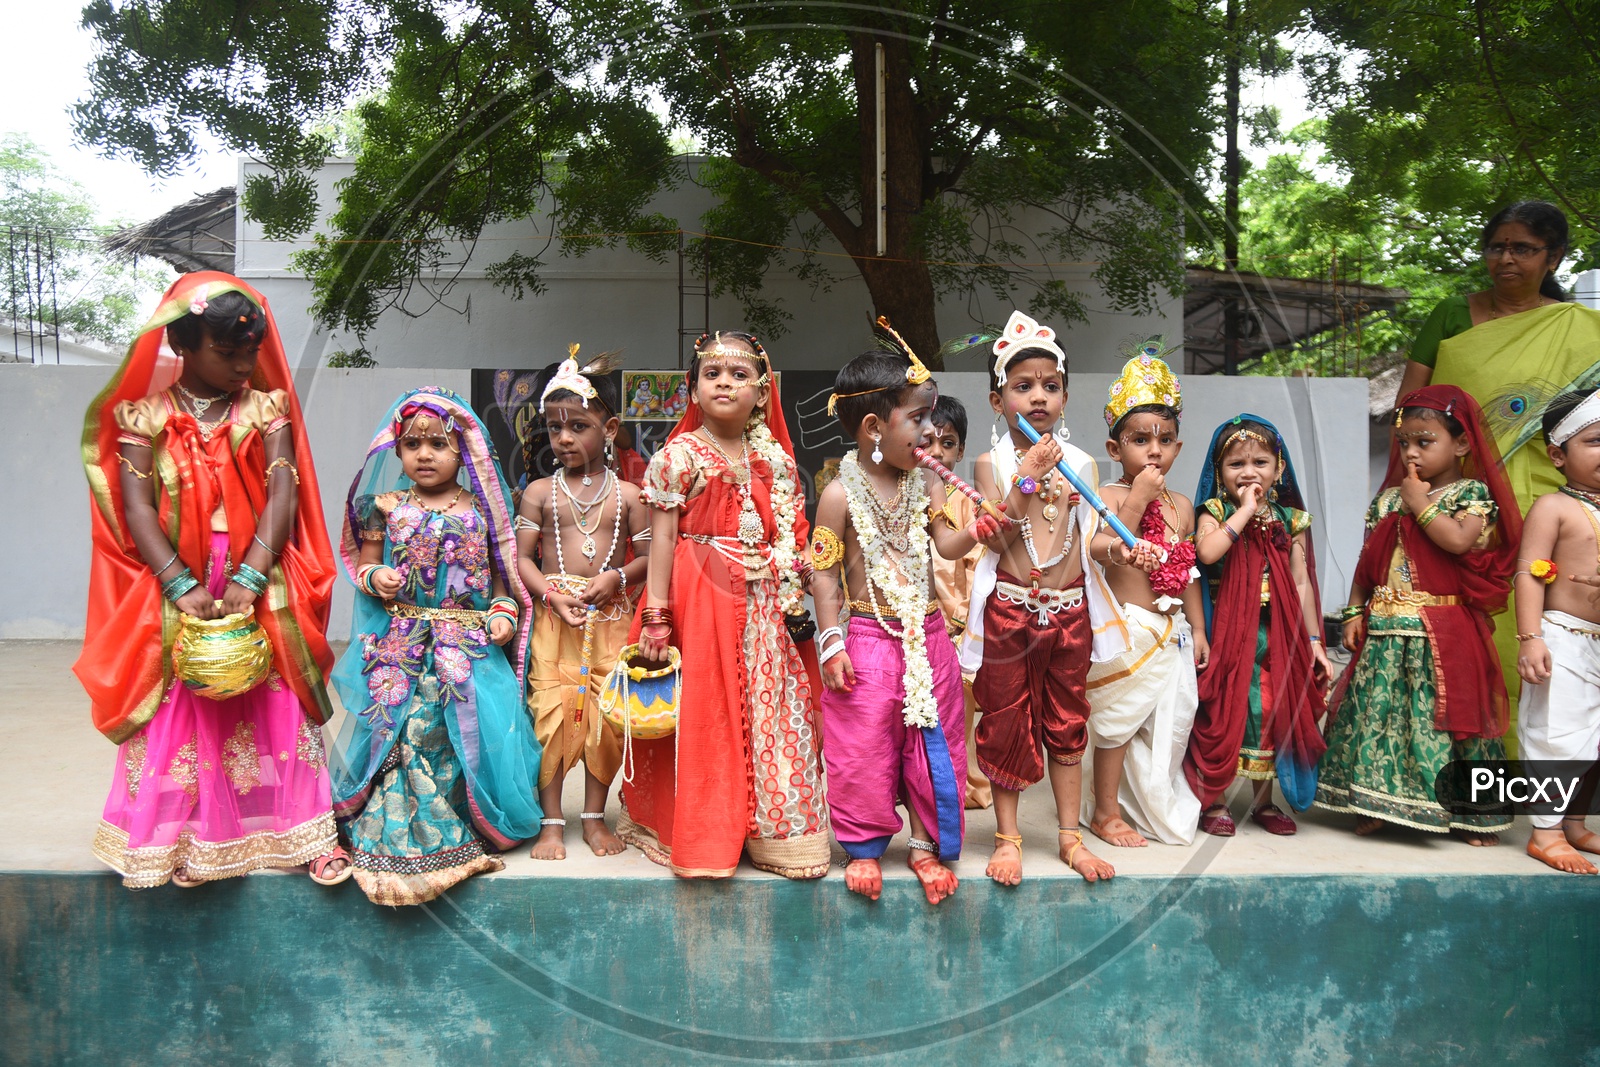 Little girls dressed as Gopika with pots in hand and Little boys dressed as Lord Krishna with a peacock feather on his head and a flute in his hand on stage